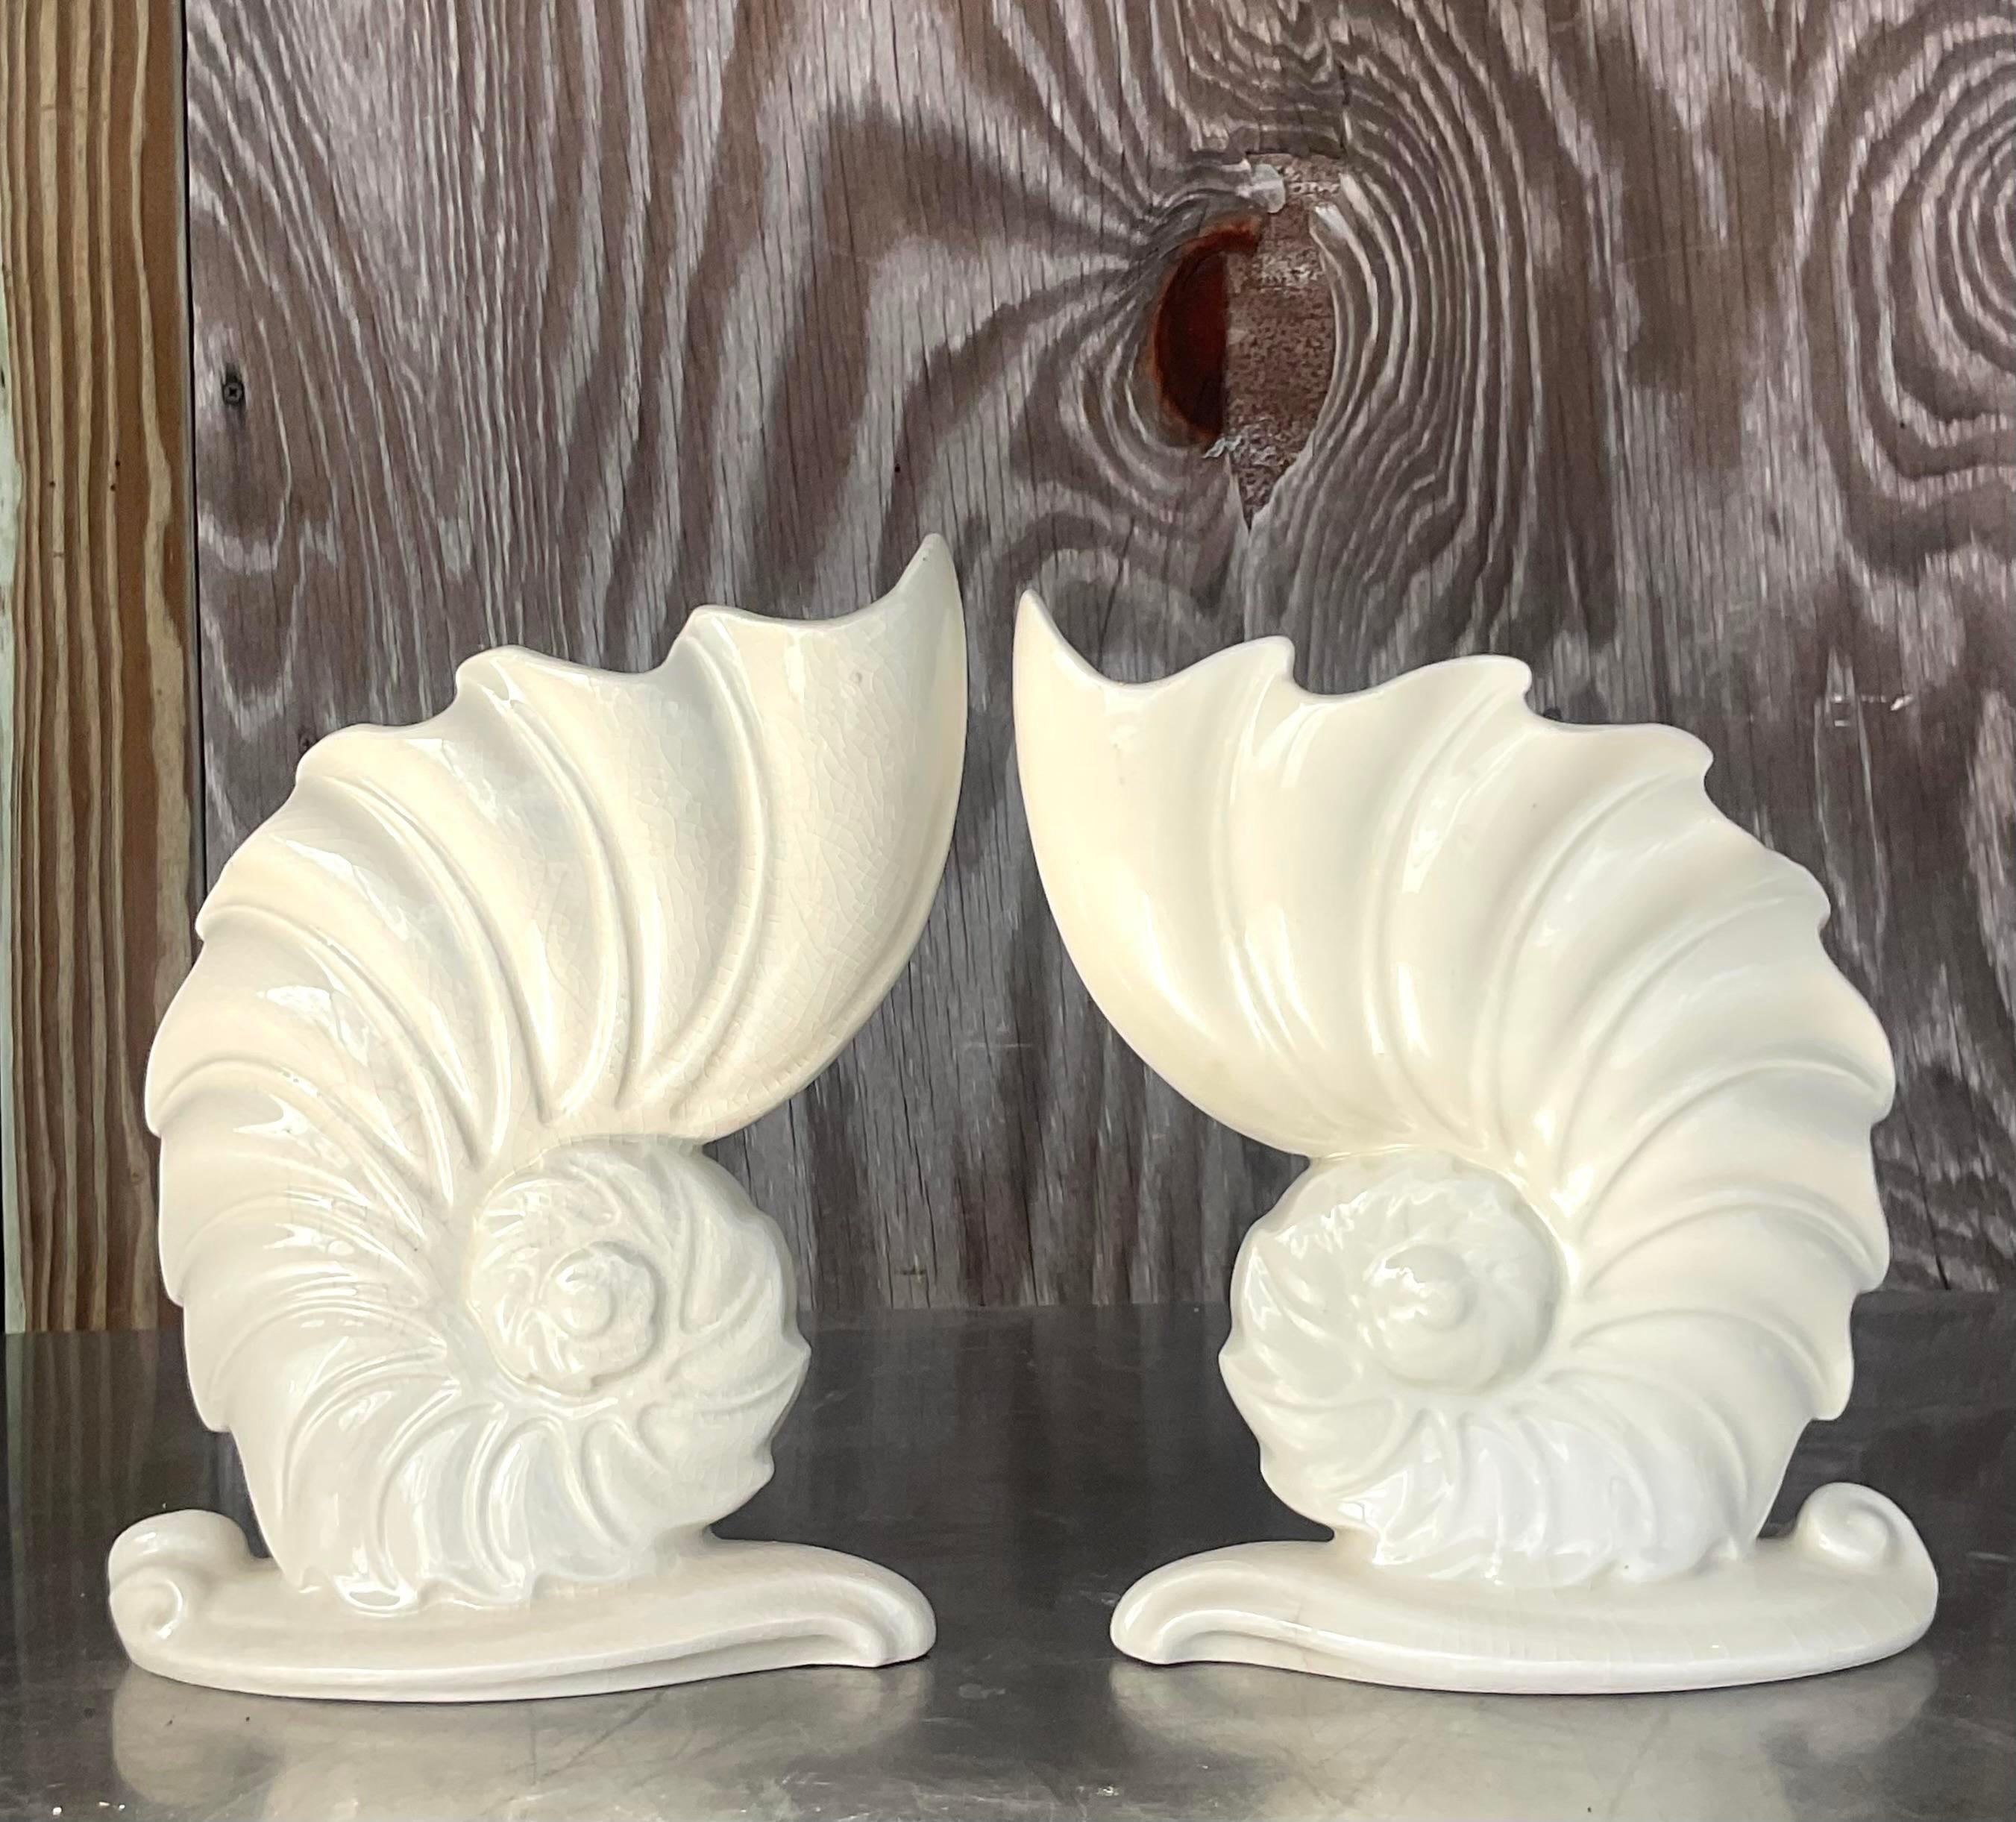 A fabulous pair of vintage Coastal vases. A chic abstract design of a Nautilus shell. A cool off white glazed ceramic finish. Acquired from a Palm Beach estate. 